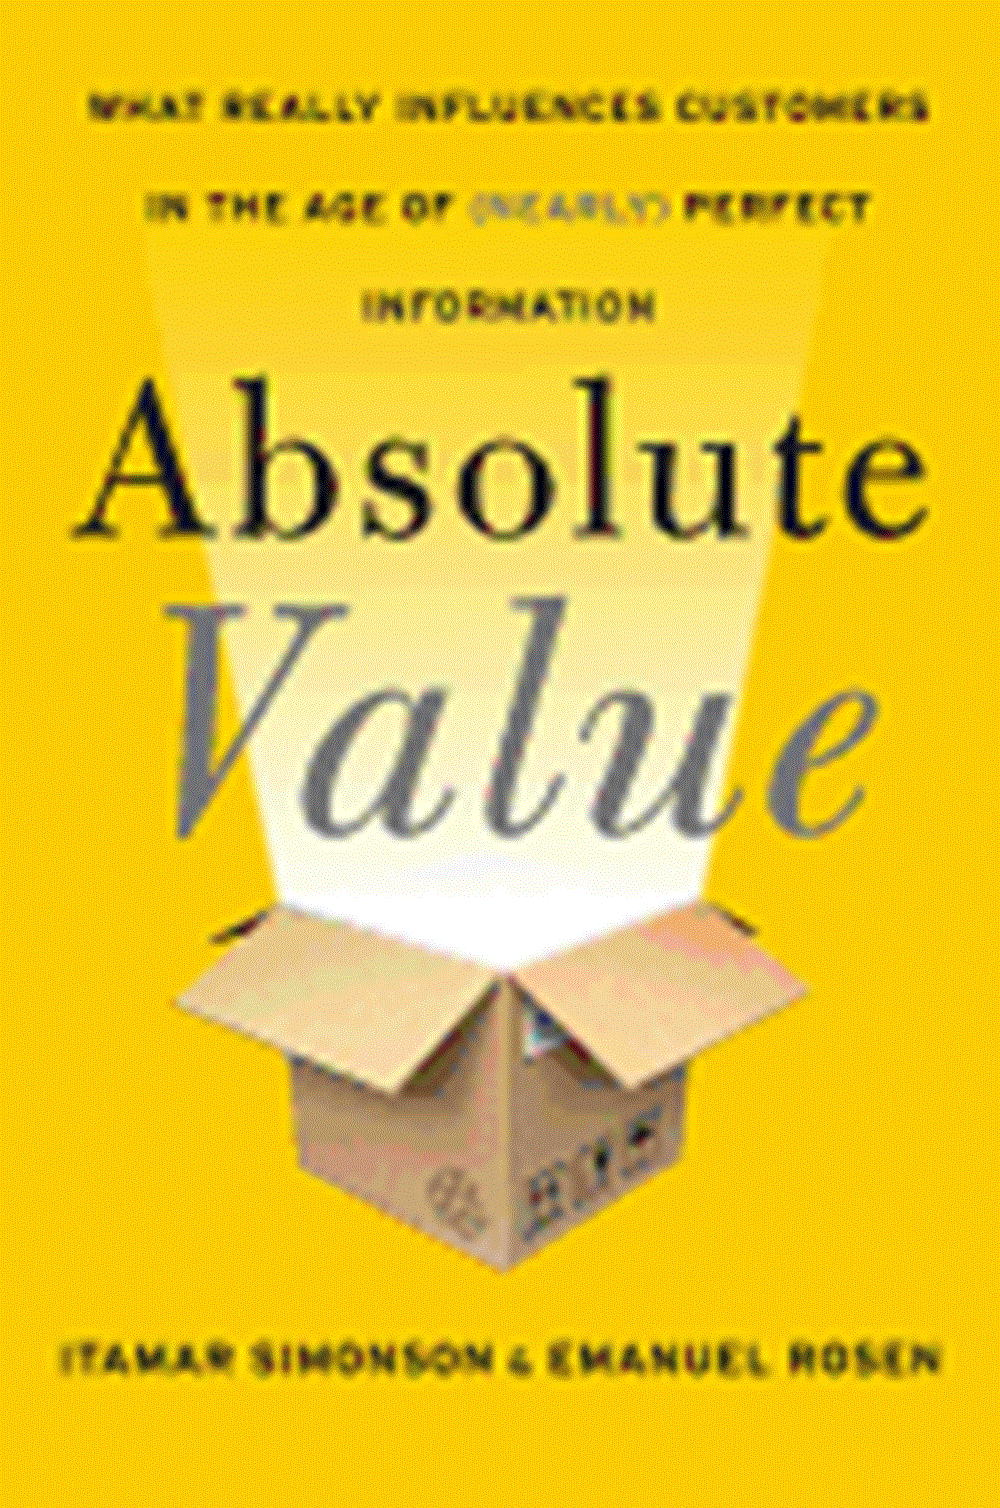 Absolute Value What Really Influences Customers in the Age of (Nearly) Perfect Information